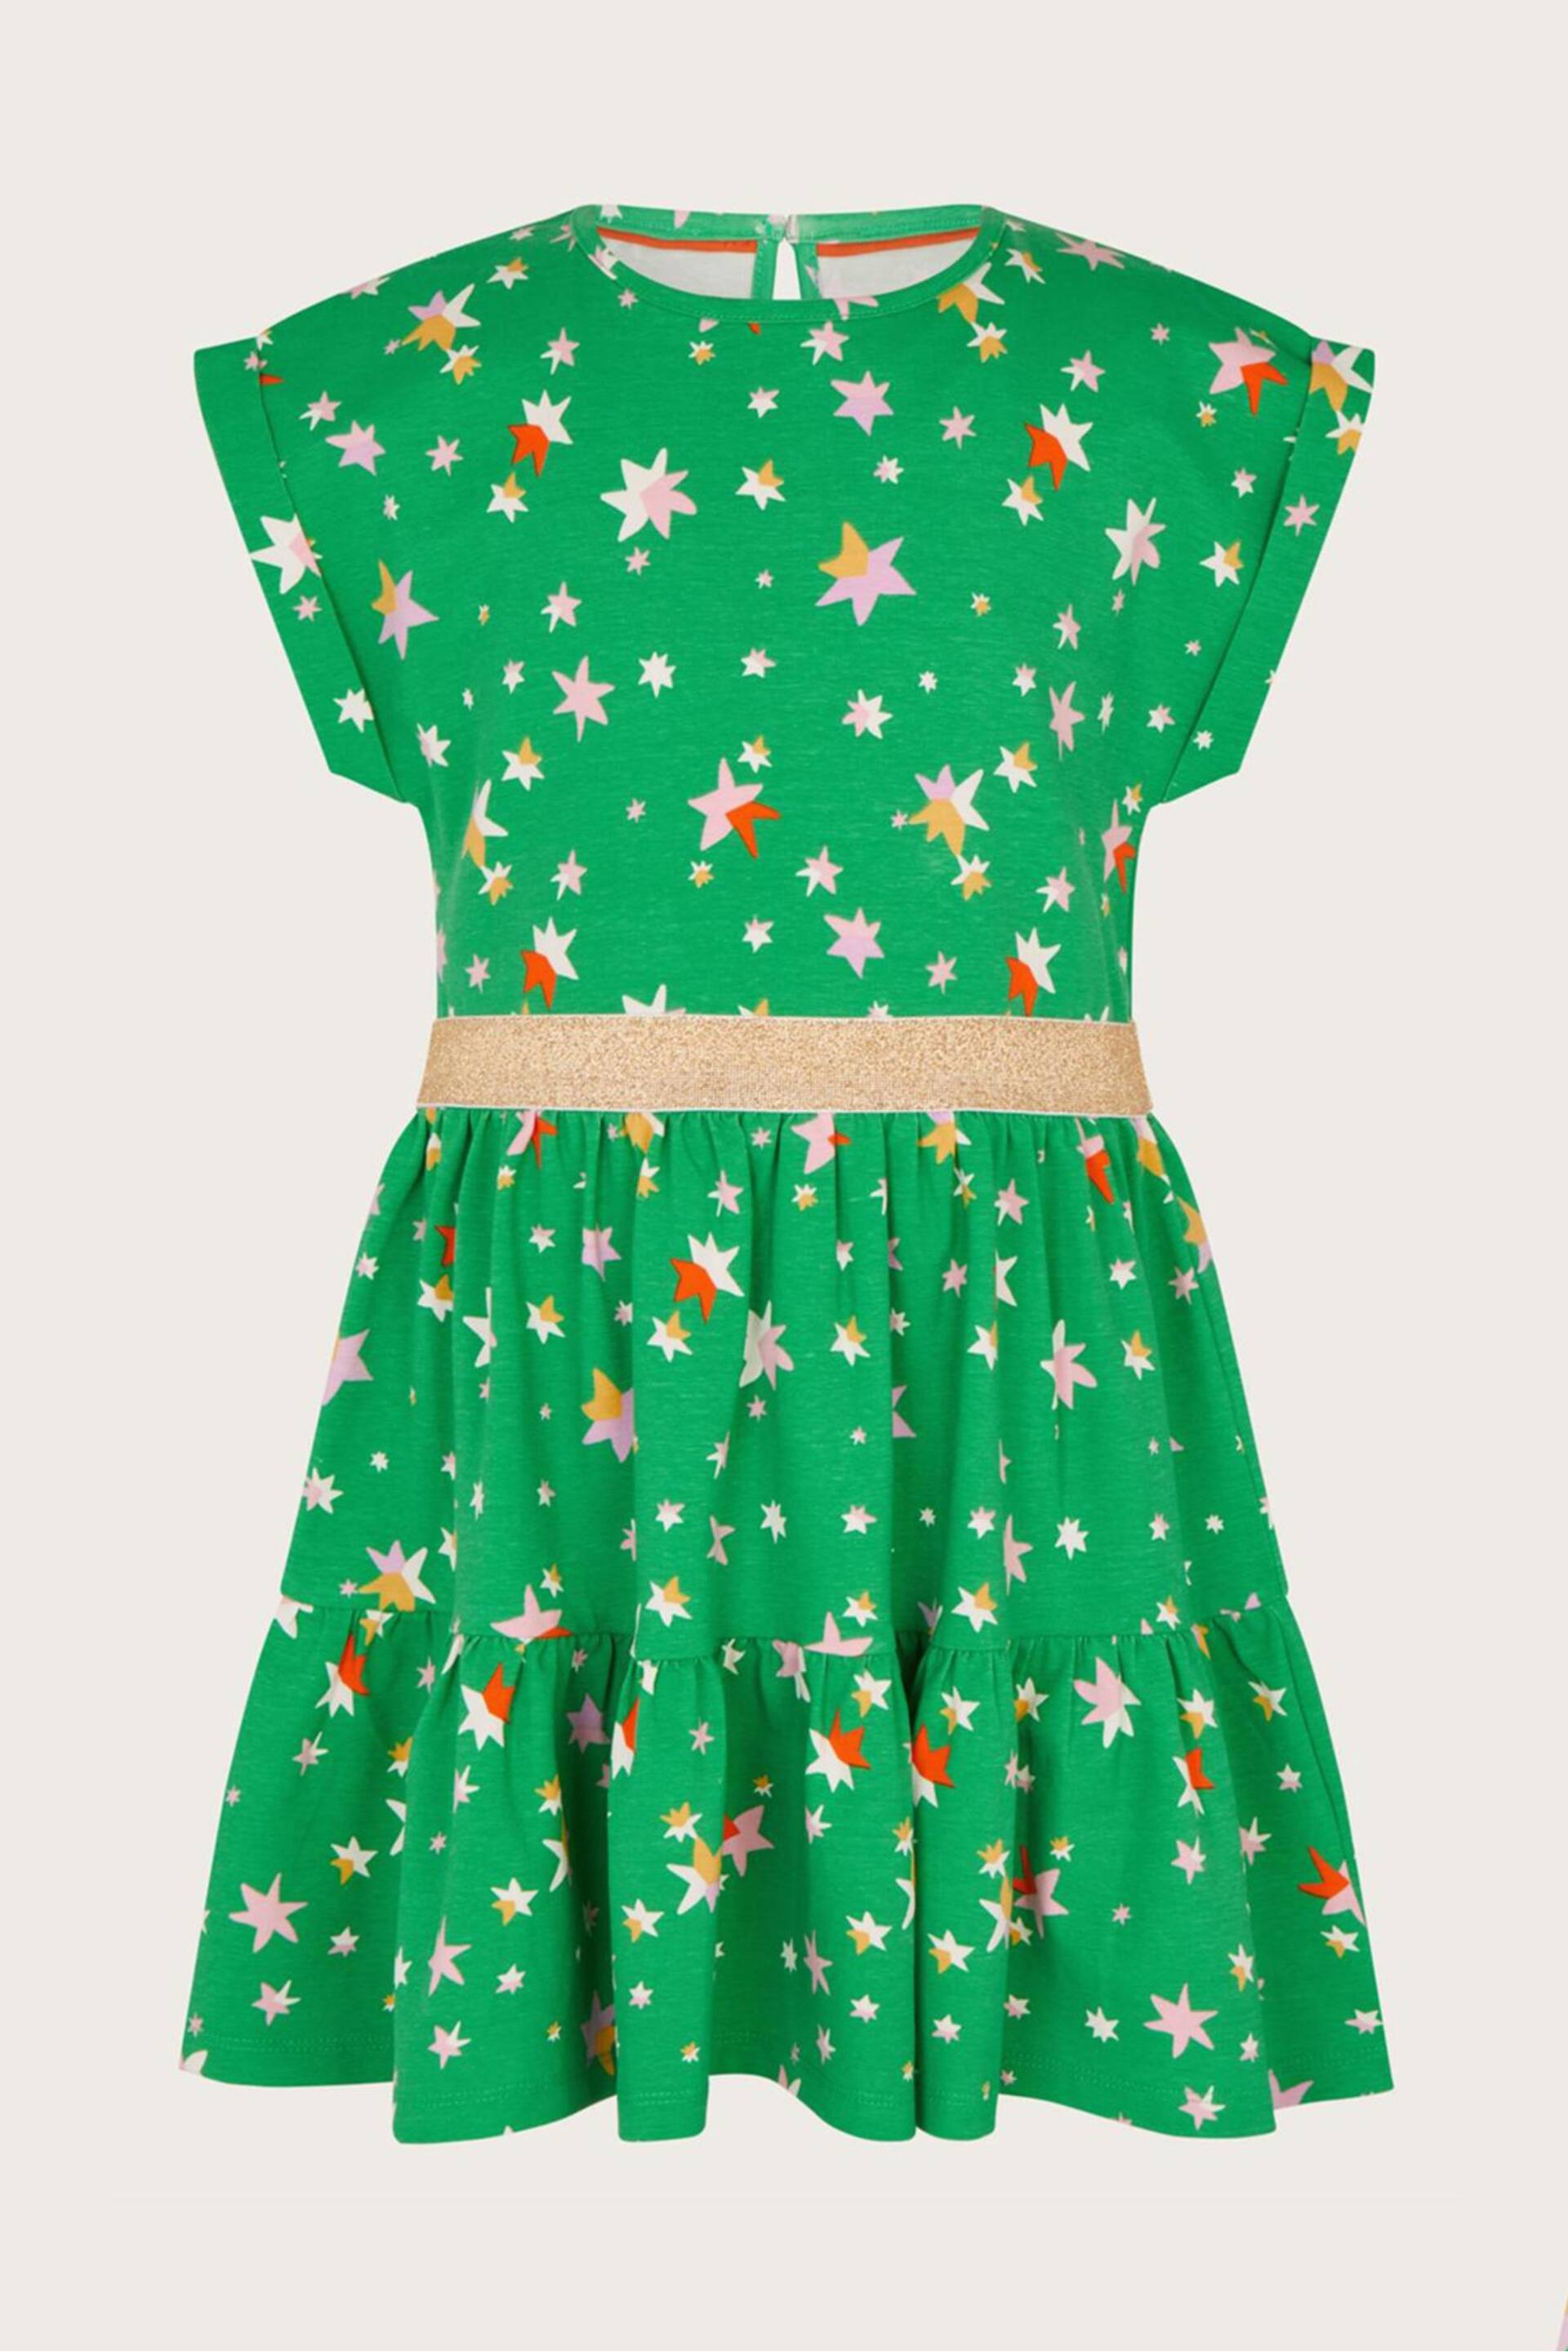 Monsoon Green Stacey Star Dress - Image 1 of 3